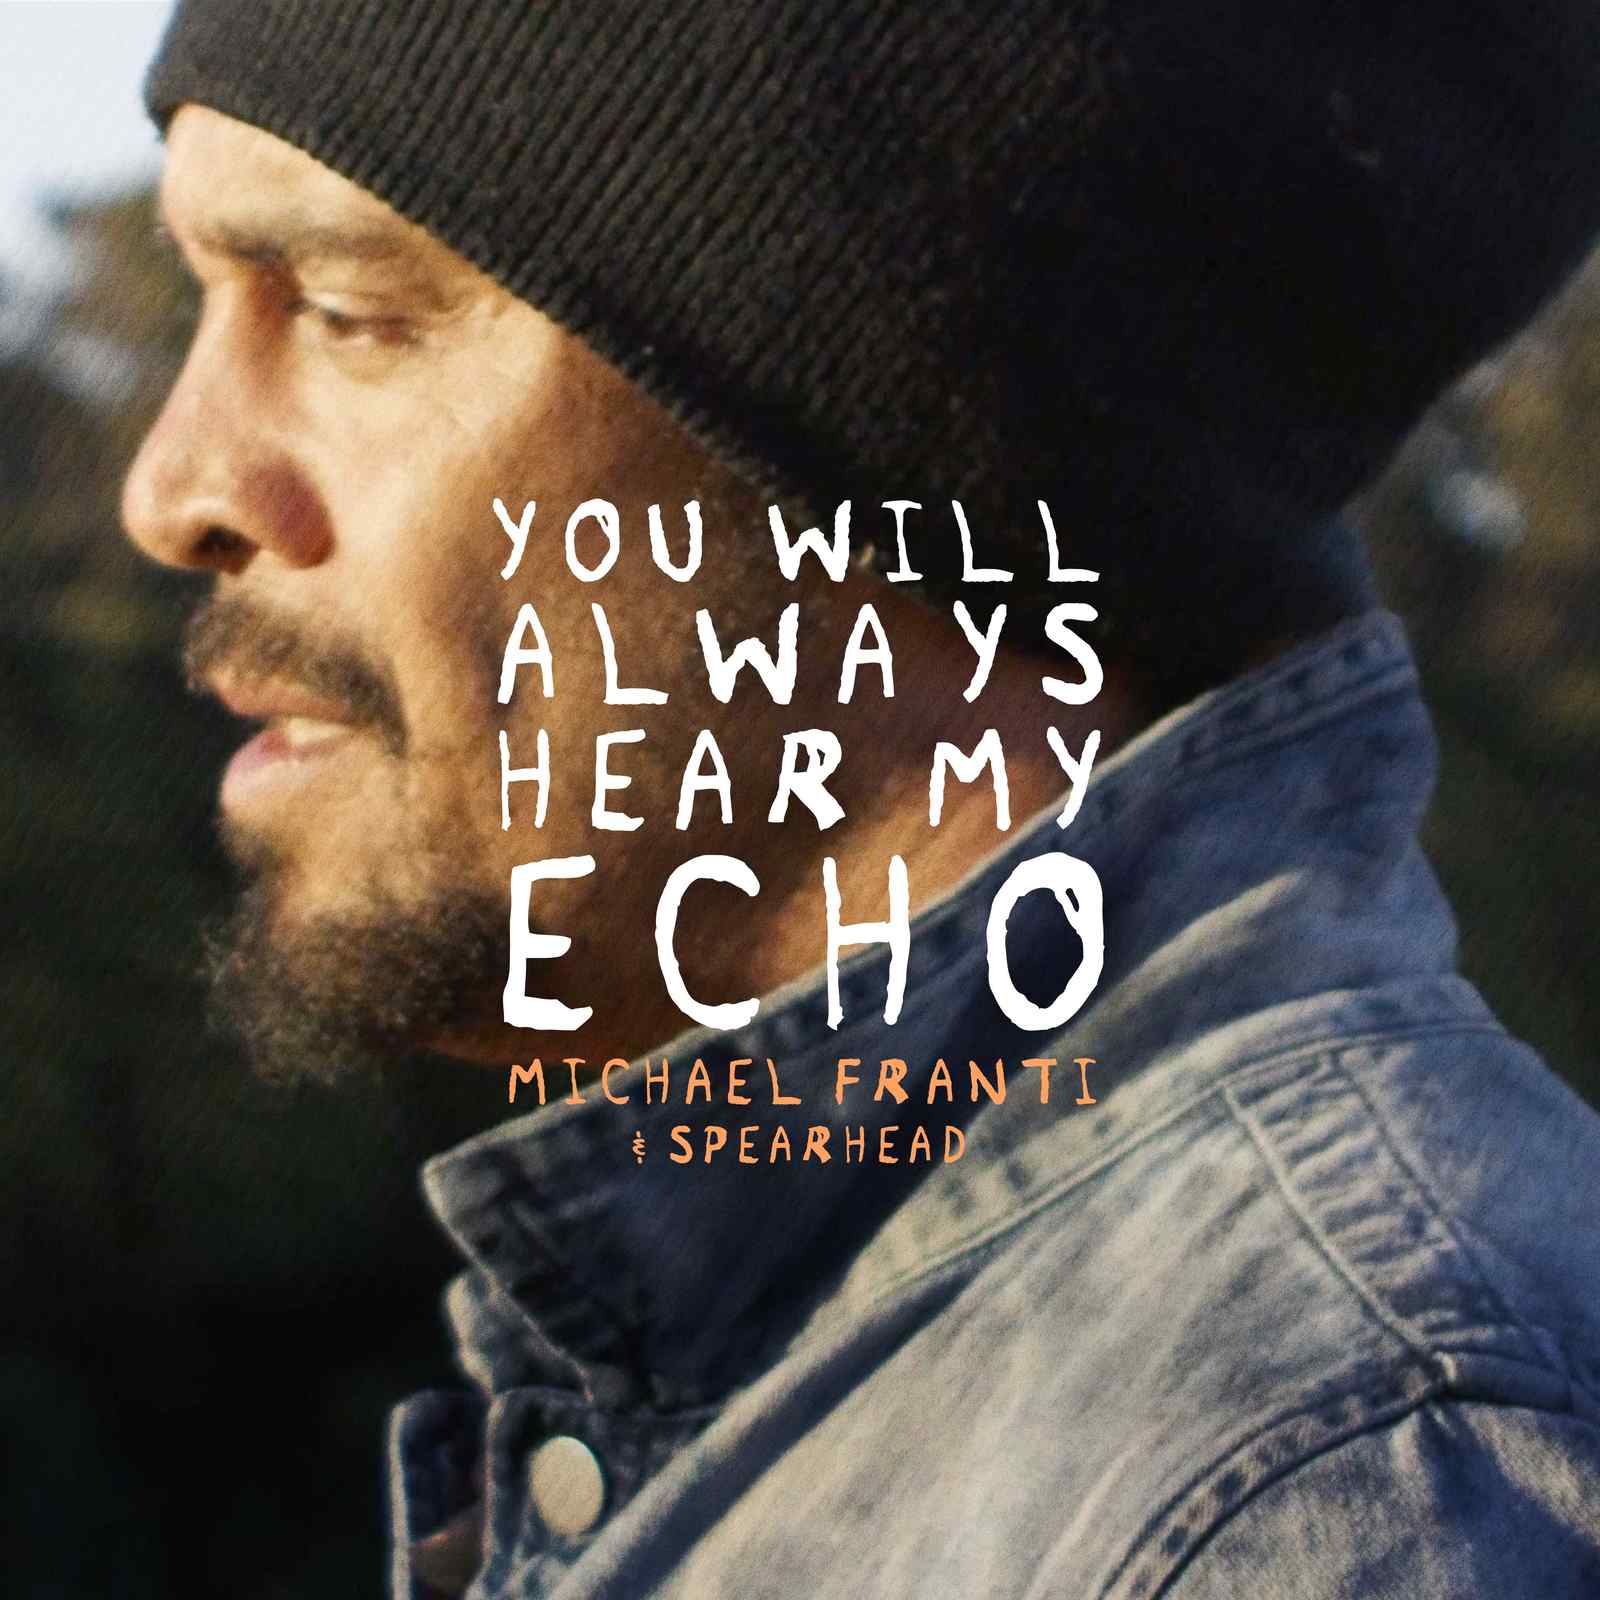 NEW SONG & MUSIC VIDEO: “YOU WILL ALWAYS HEAR MY ECHO”